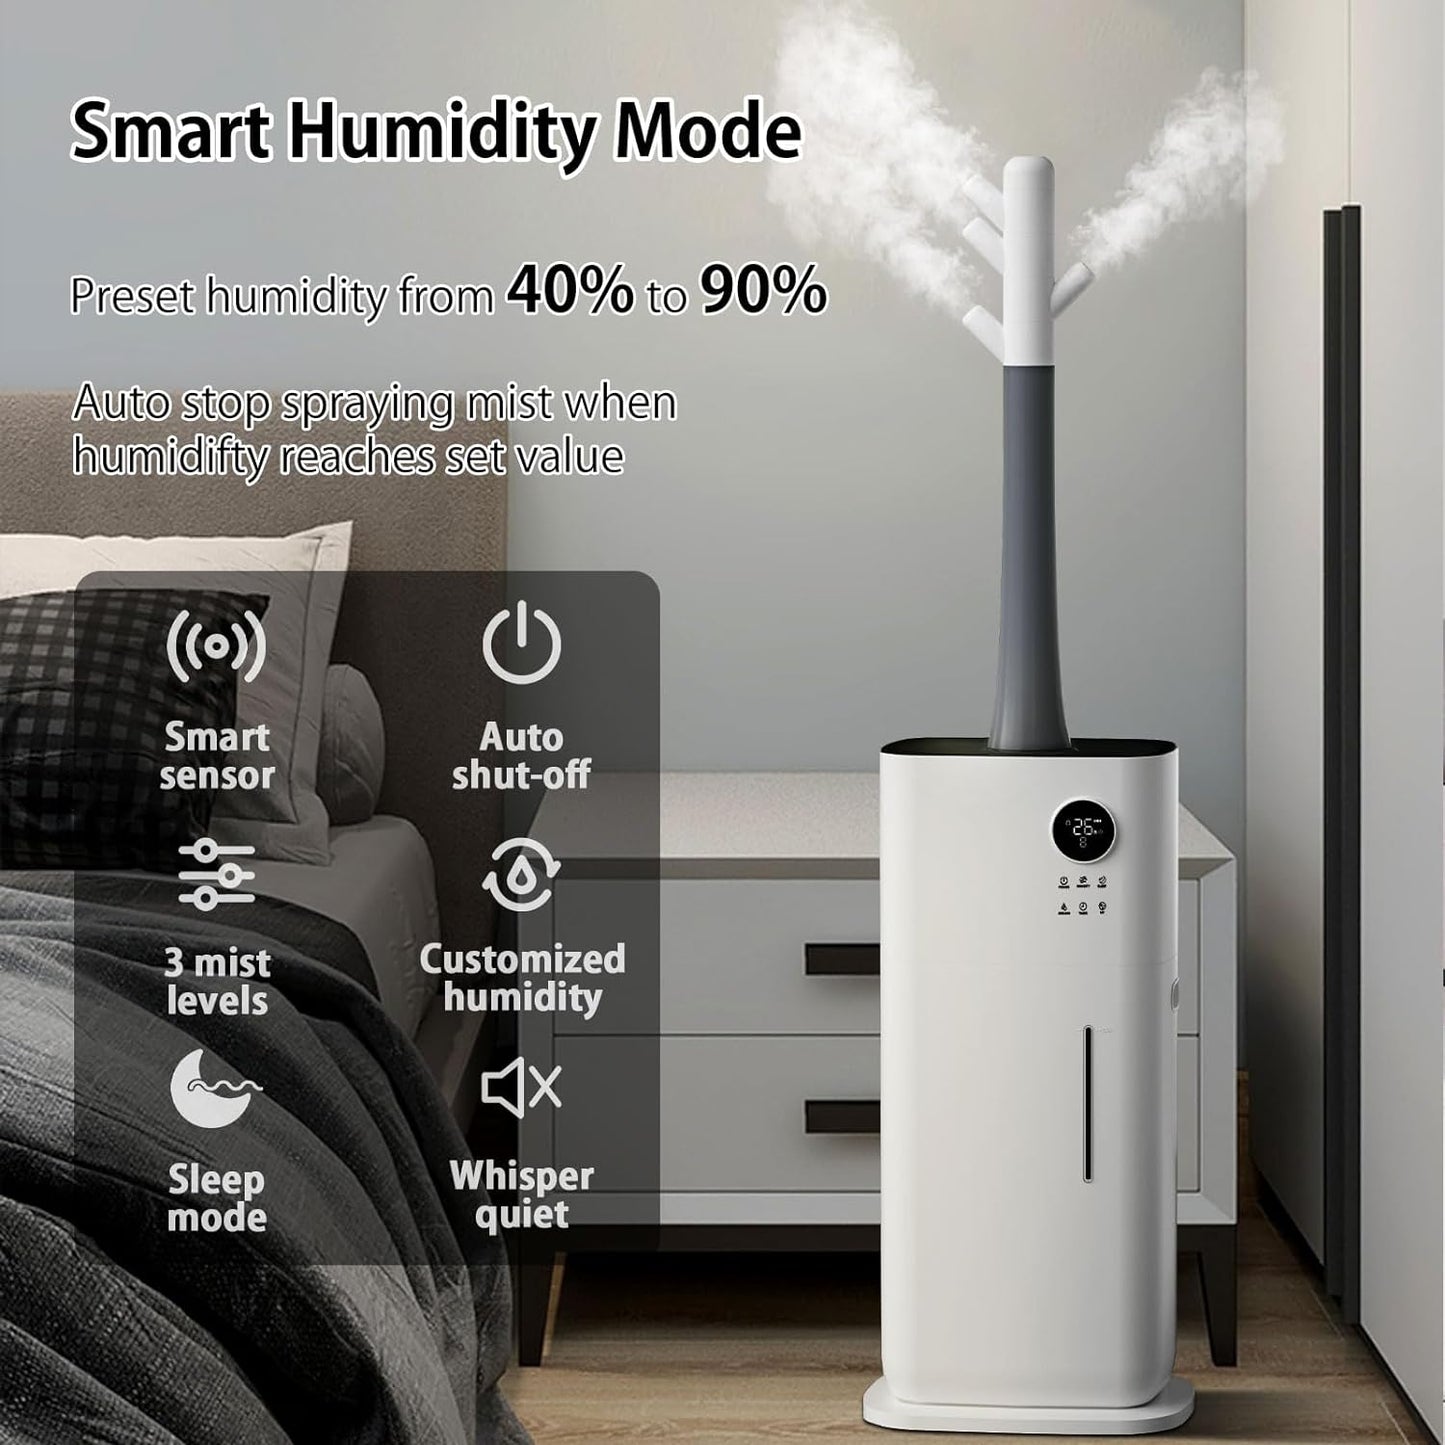 Large Humidifier, Humidifiers for Bedroom Large Room, YOKEKON 5.3Gal/20L Large Humidifiers for Home 3000 sq ft, Whole House Humidifiers Industrial Commercial Humidifier with 360 Nozzle Sets